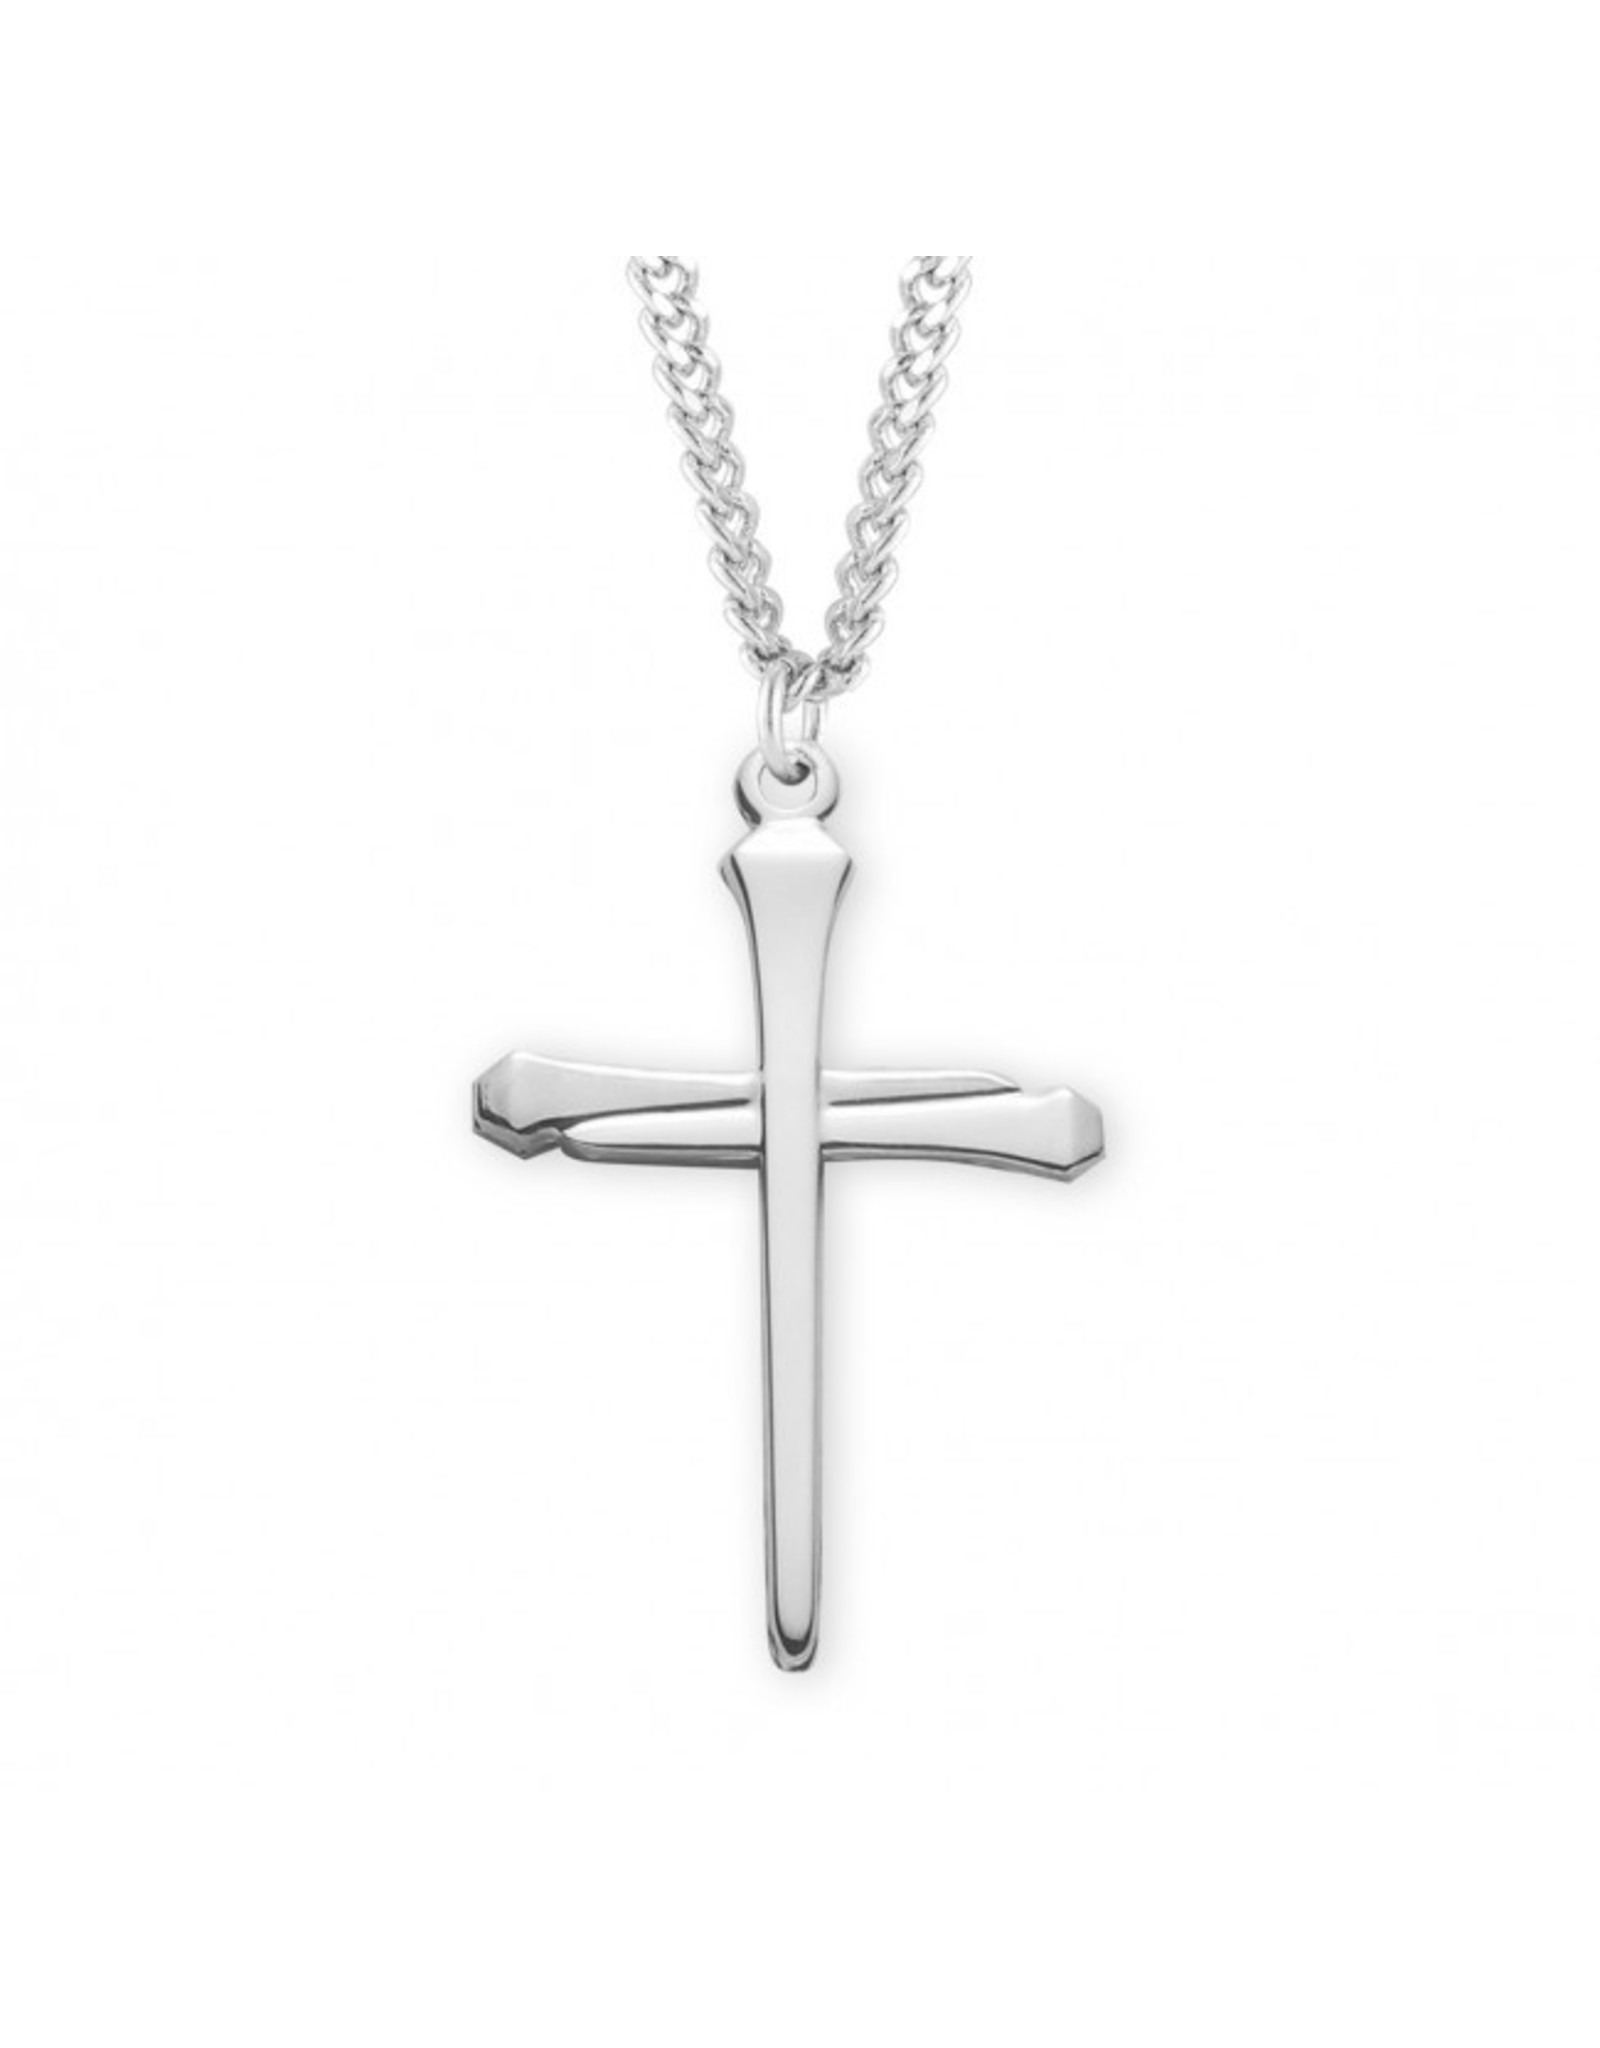 HMH Religious Manufacturing Cross Nail Medal, Sterling Silver, 24" Chain